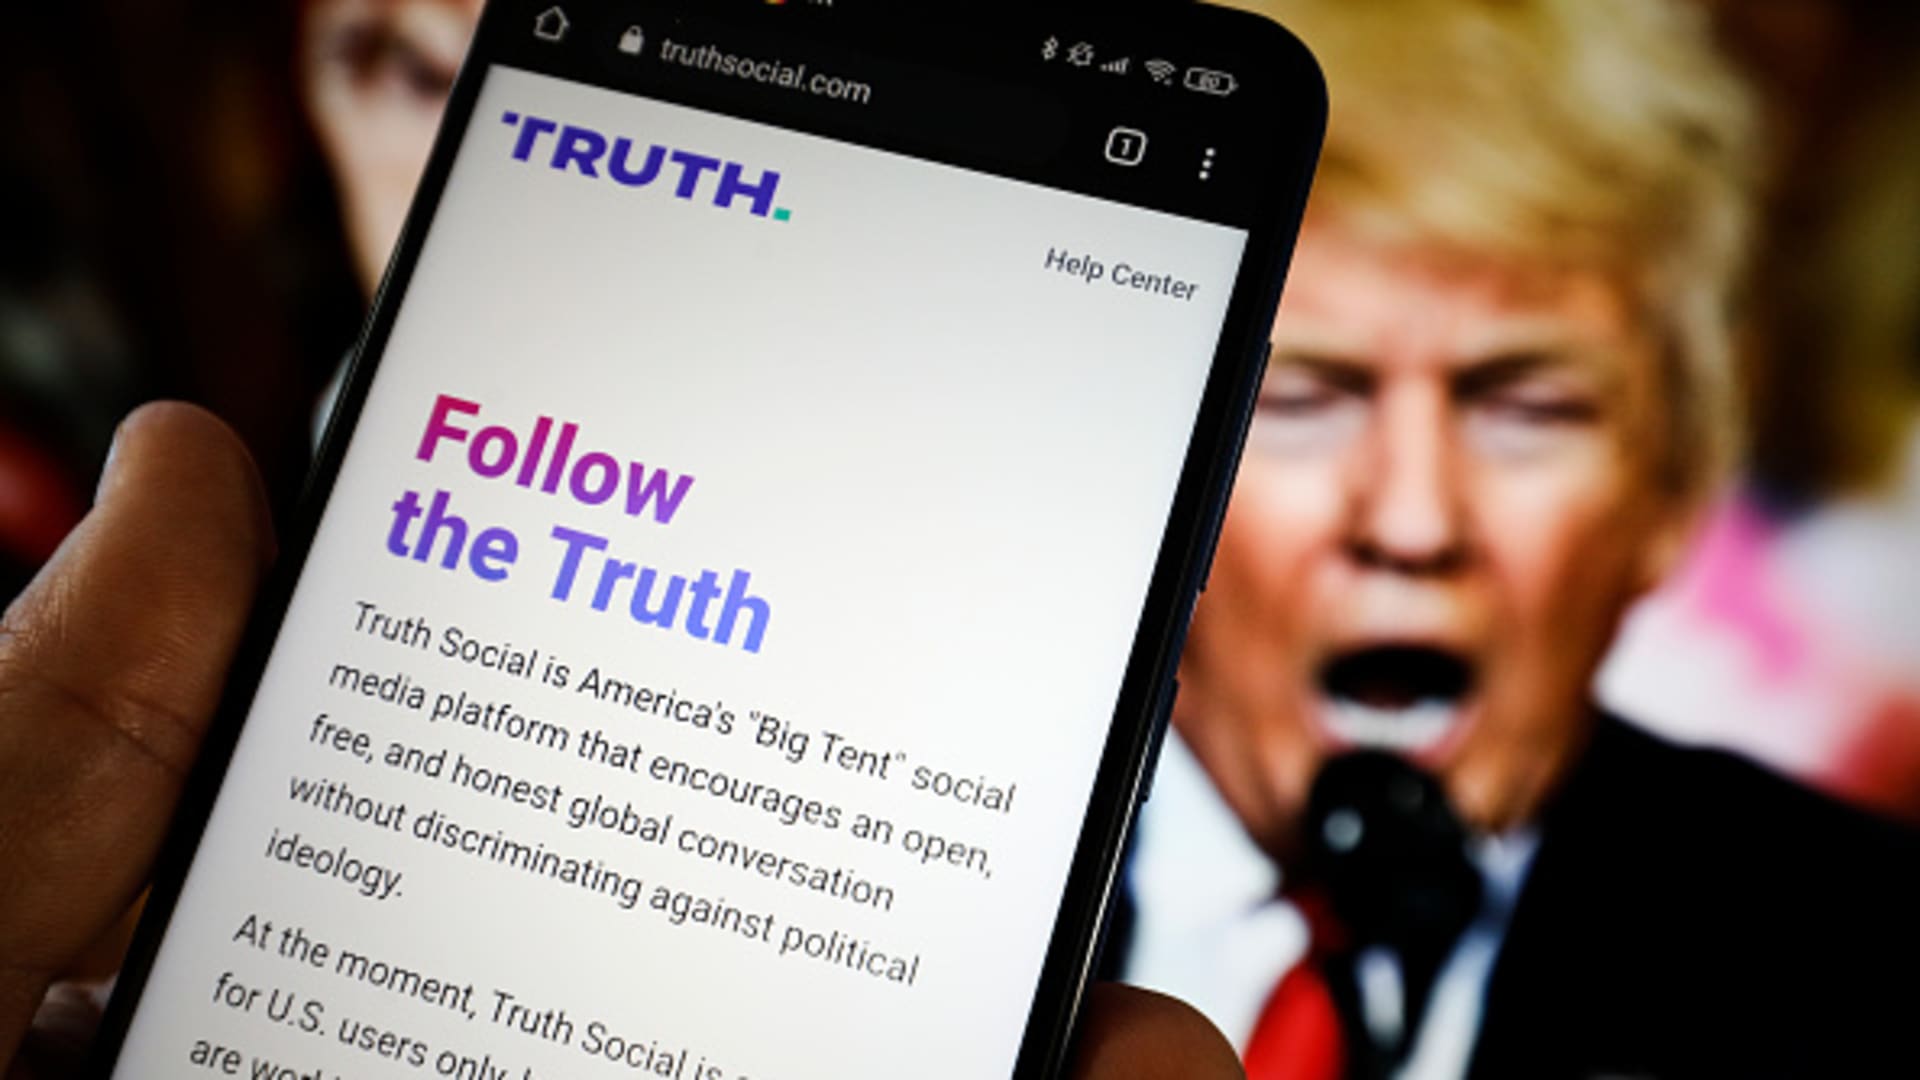 Trump tries to boost support for Truth Social as DJT stock tanks